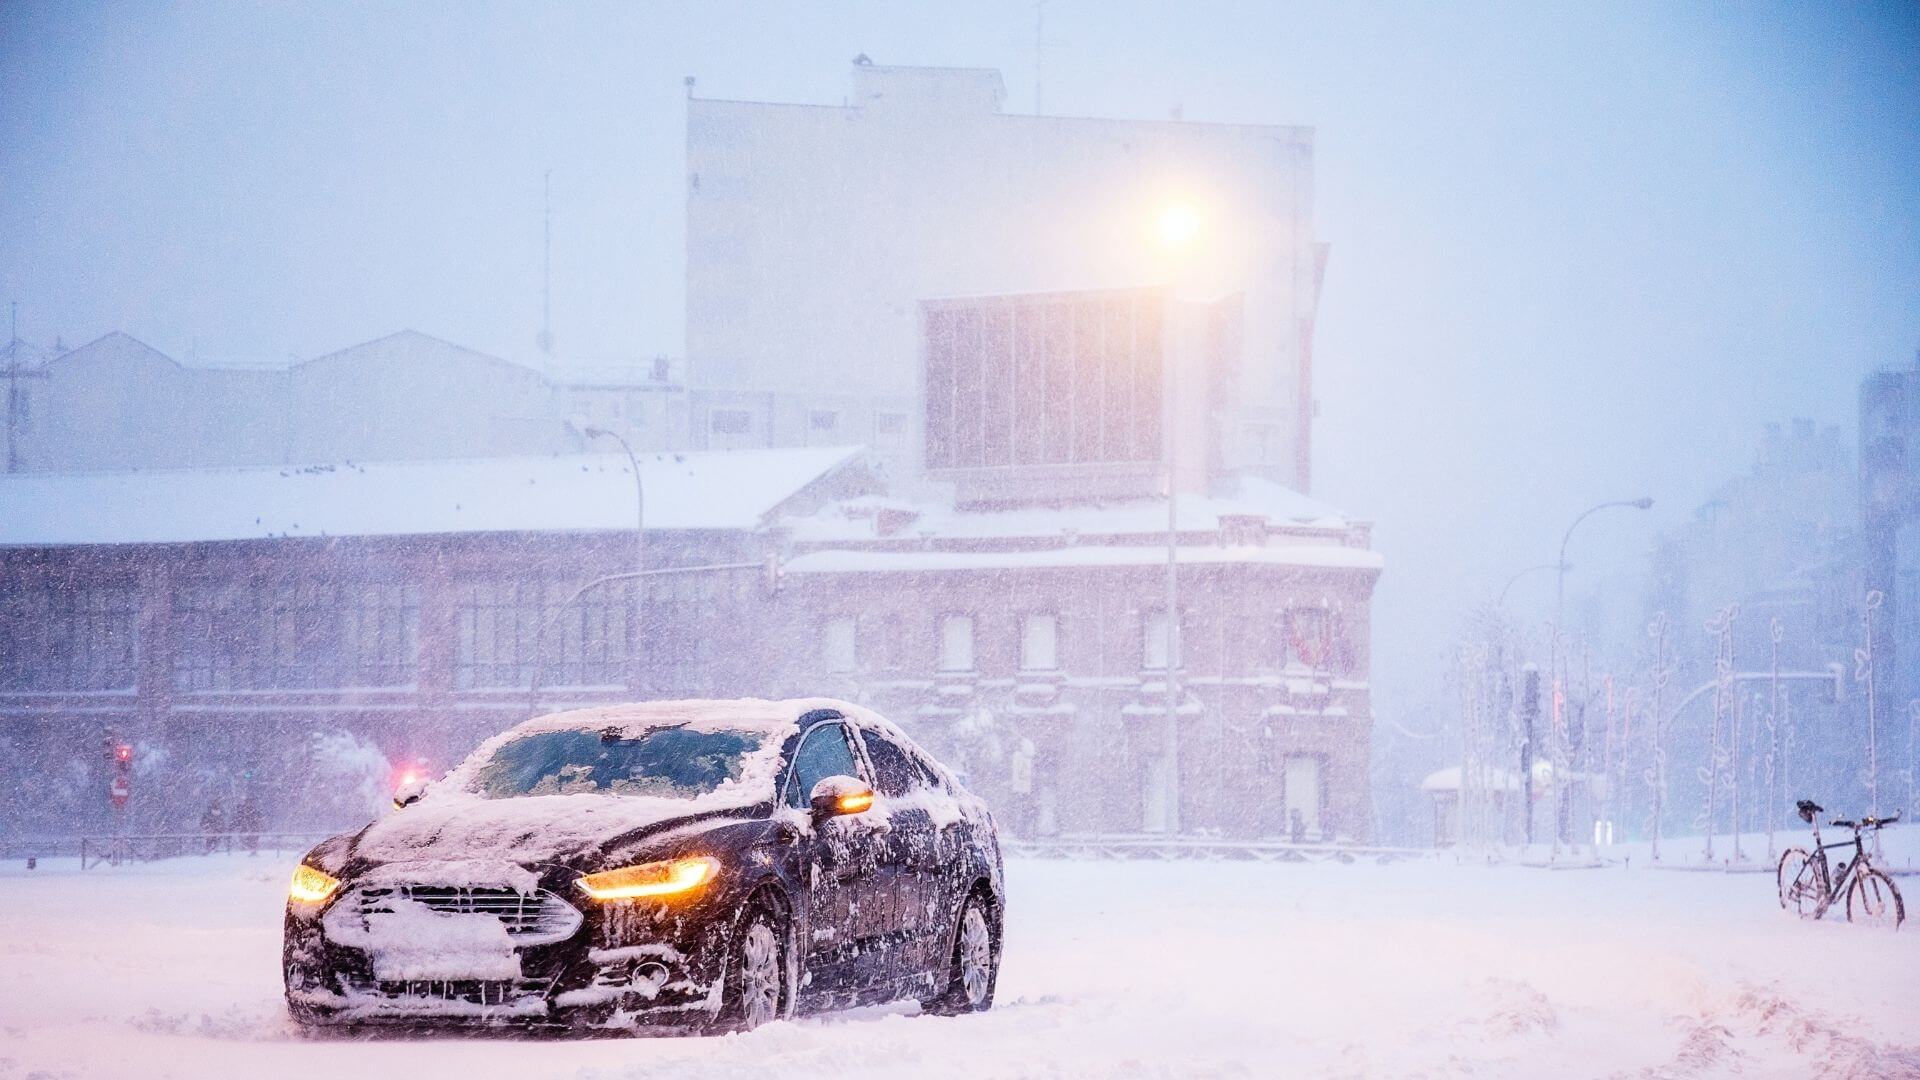 Winter driving: Looking after your vehicle